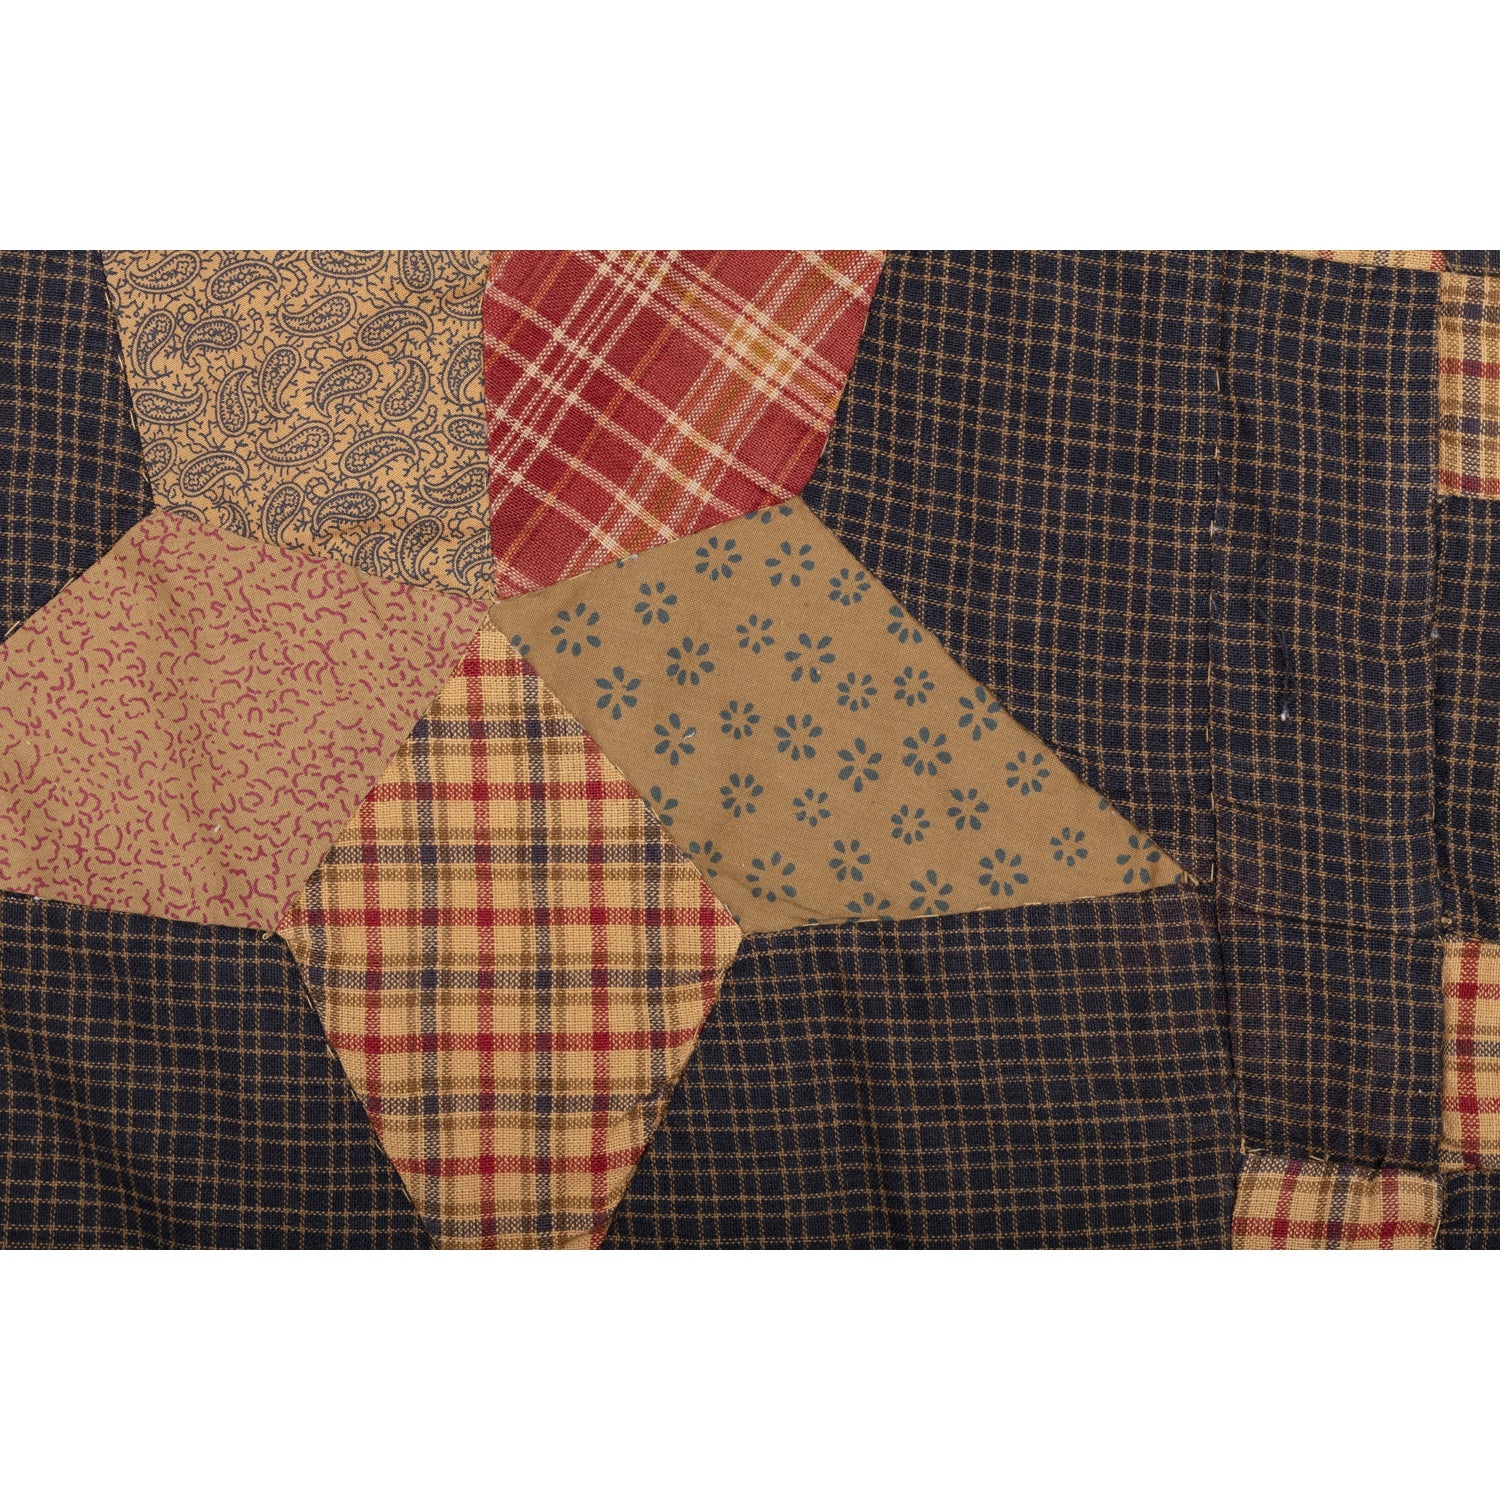 Arlington Runner Quilted Patchwork Star 13x36 VHC Brands